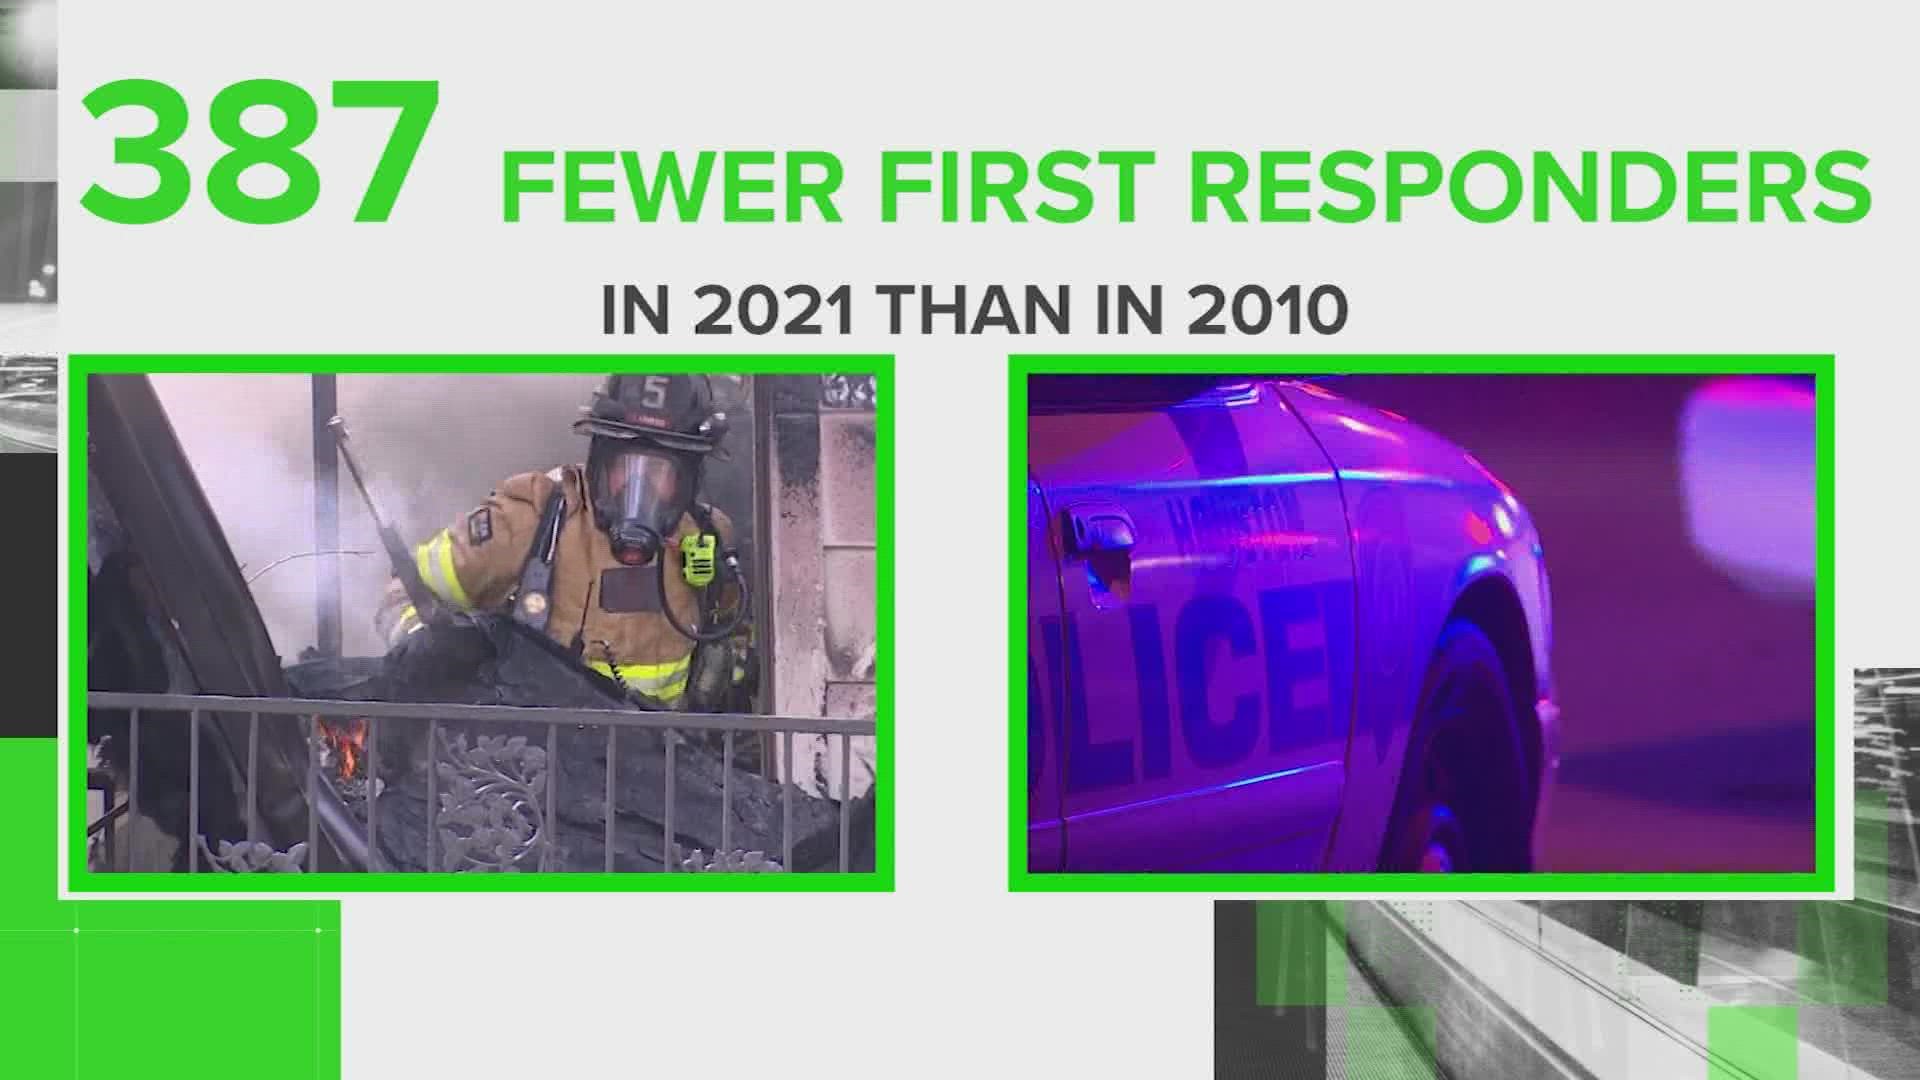 KHOU 11's Cheryl Mercedes shows there was a decrease of first responders in the city of Houston from 2021 to 2010